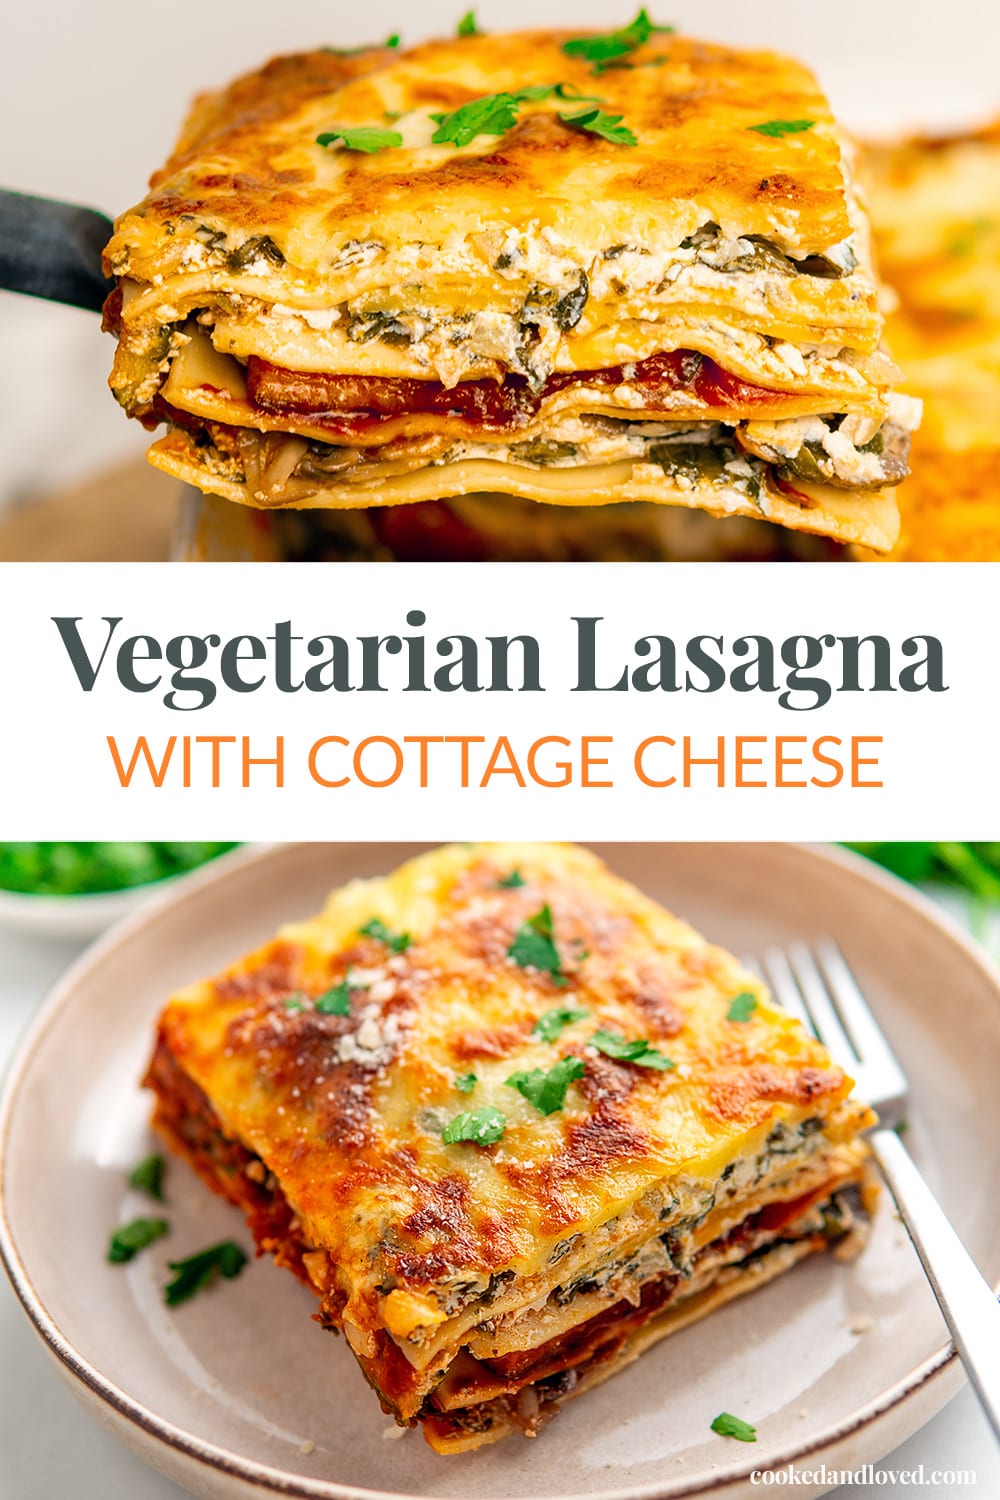 Best Vegetarian Lasagna With Cottage Cheese & Spinach